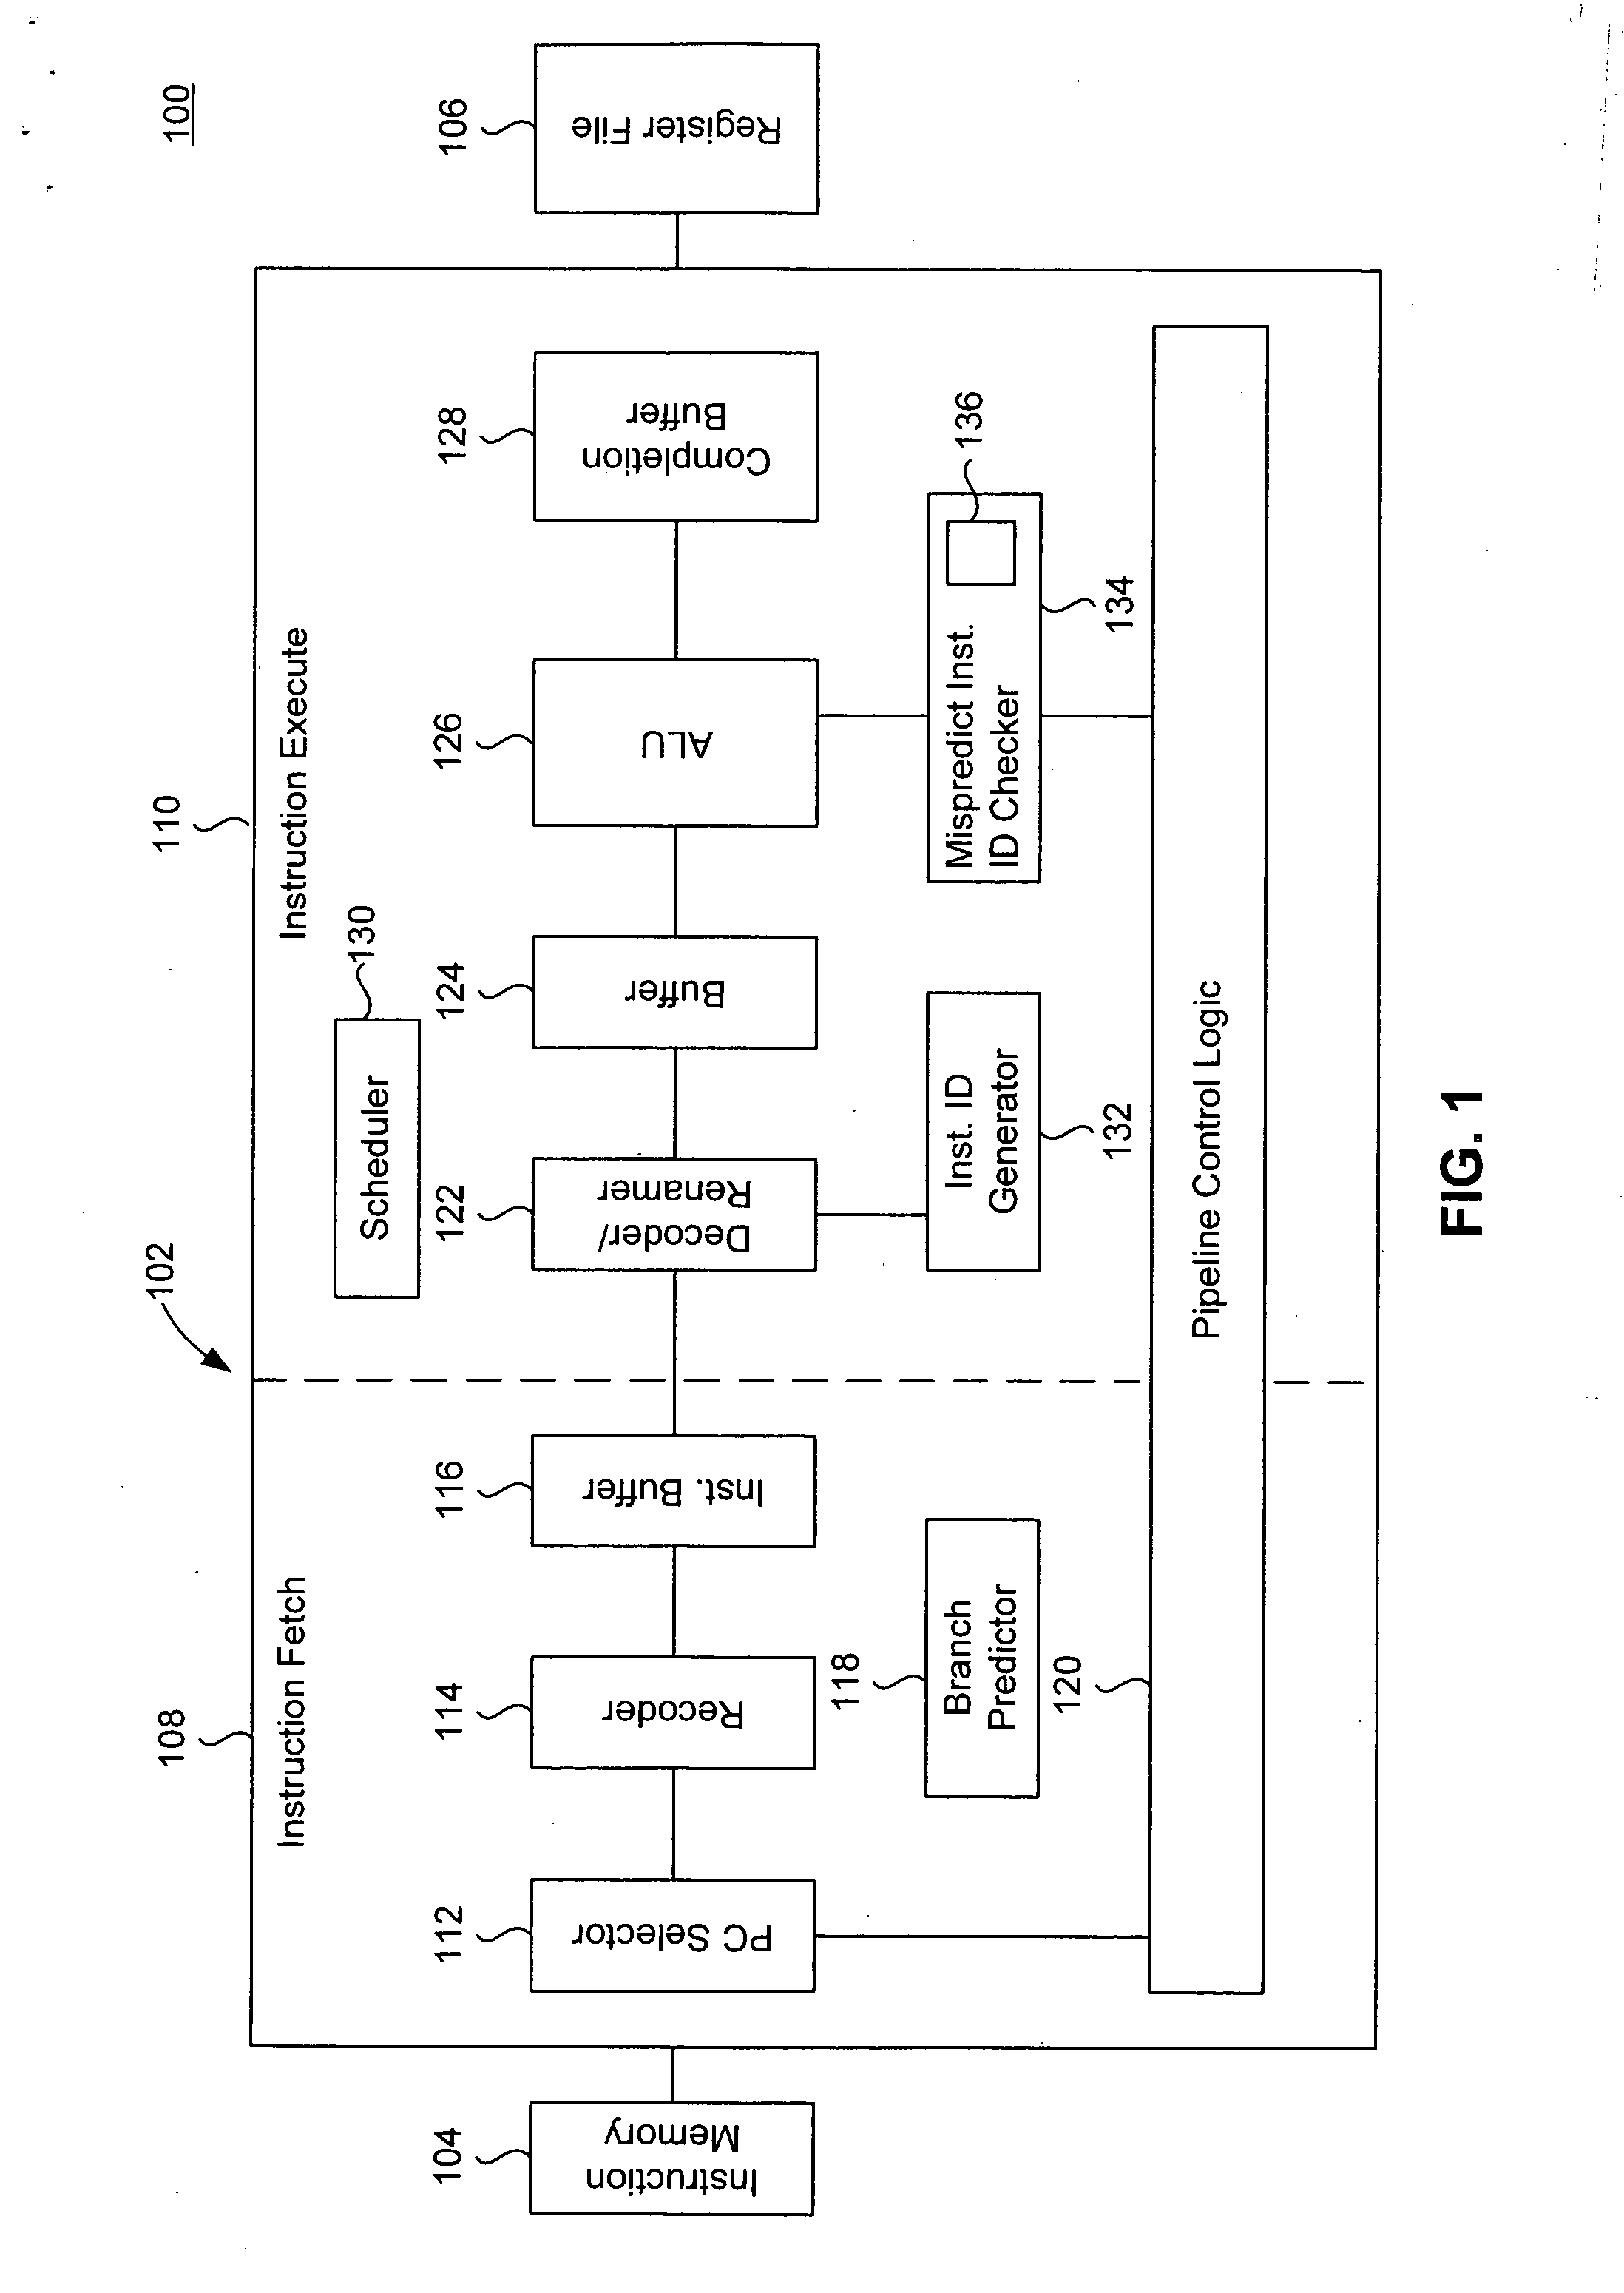 Processor core and method for managing branch misprediction in an out-of-order processor pipeline